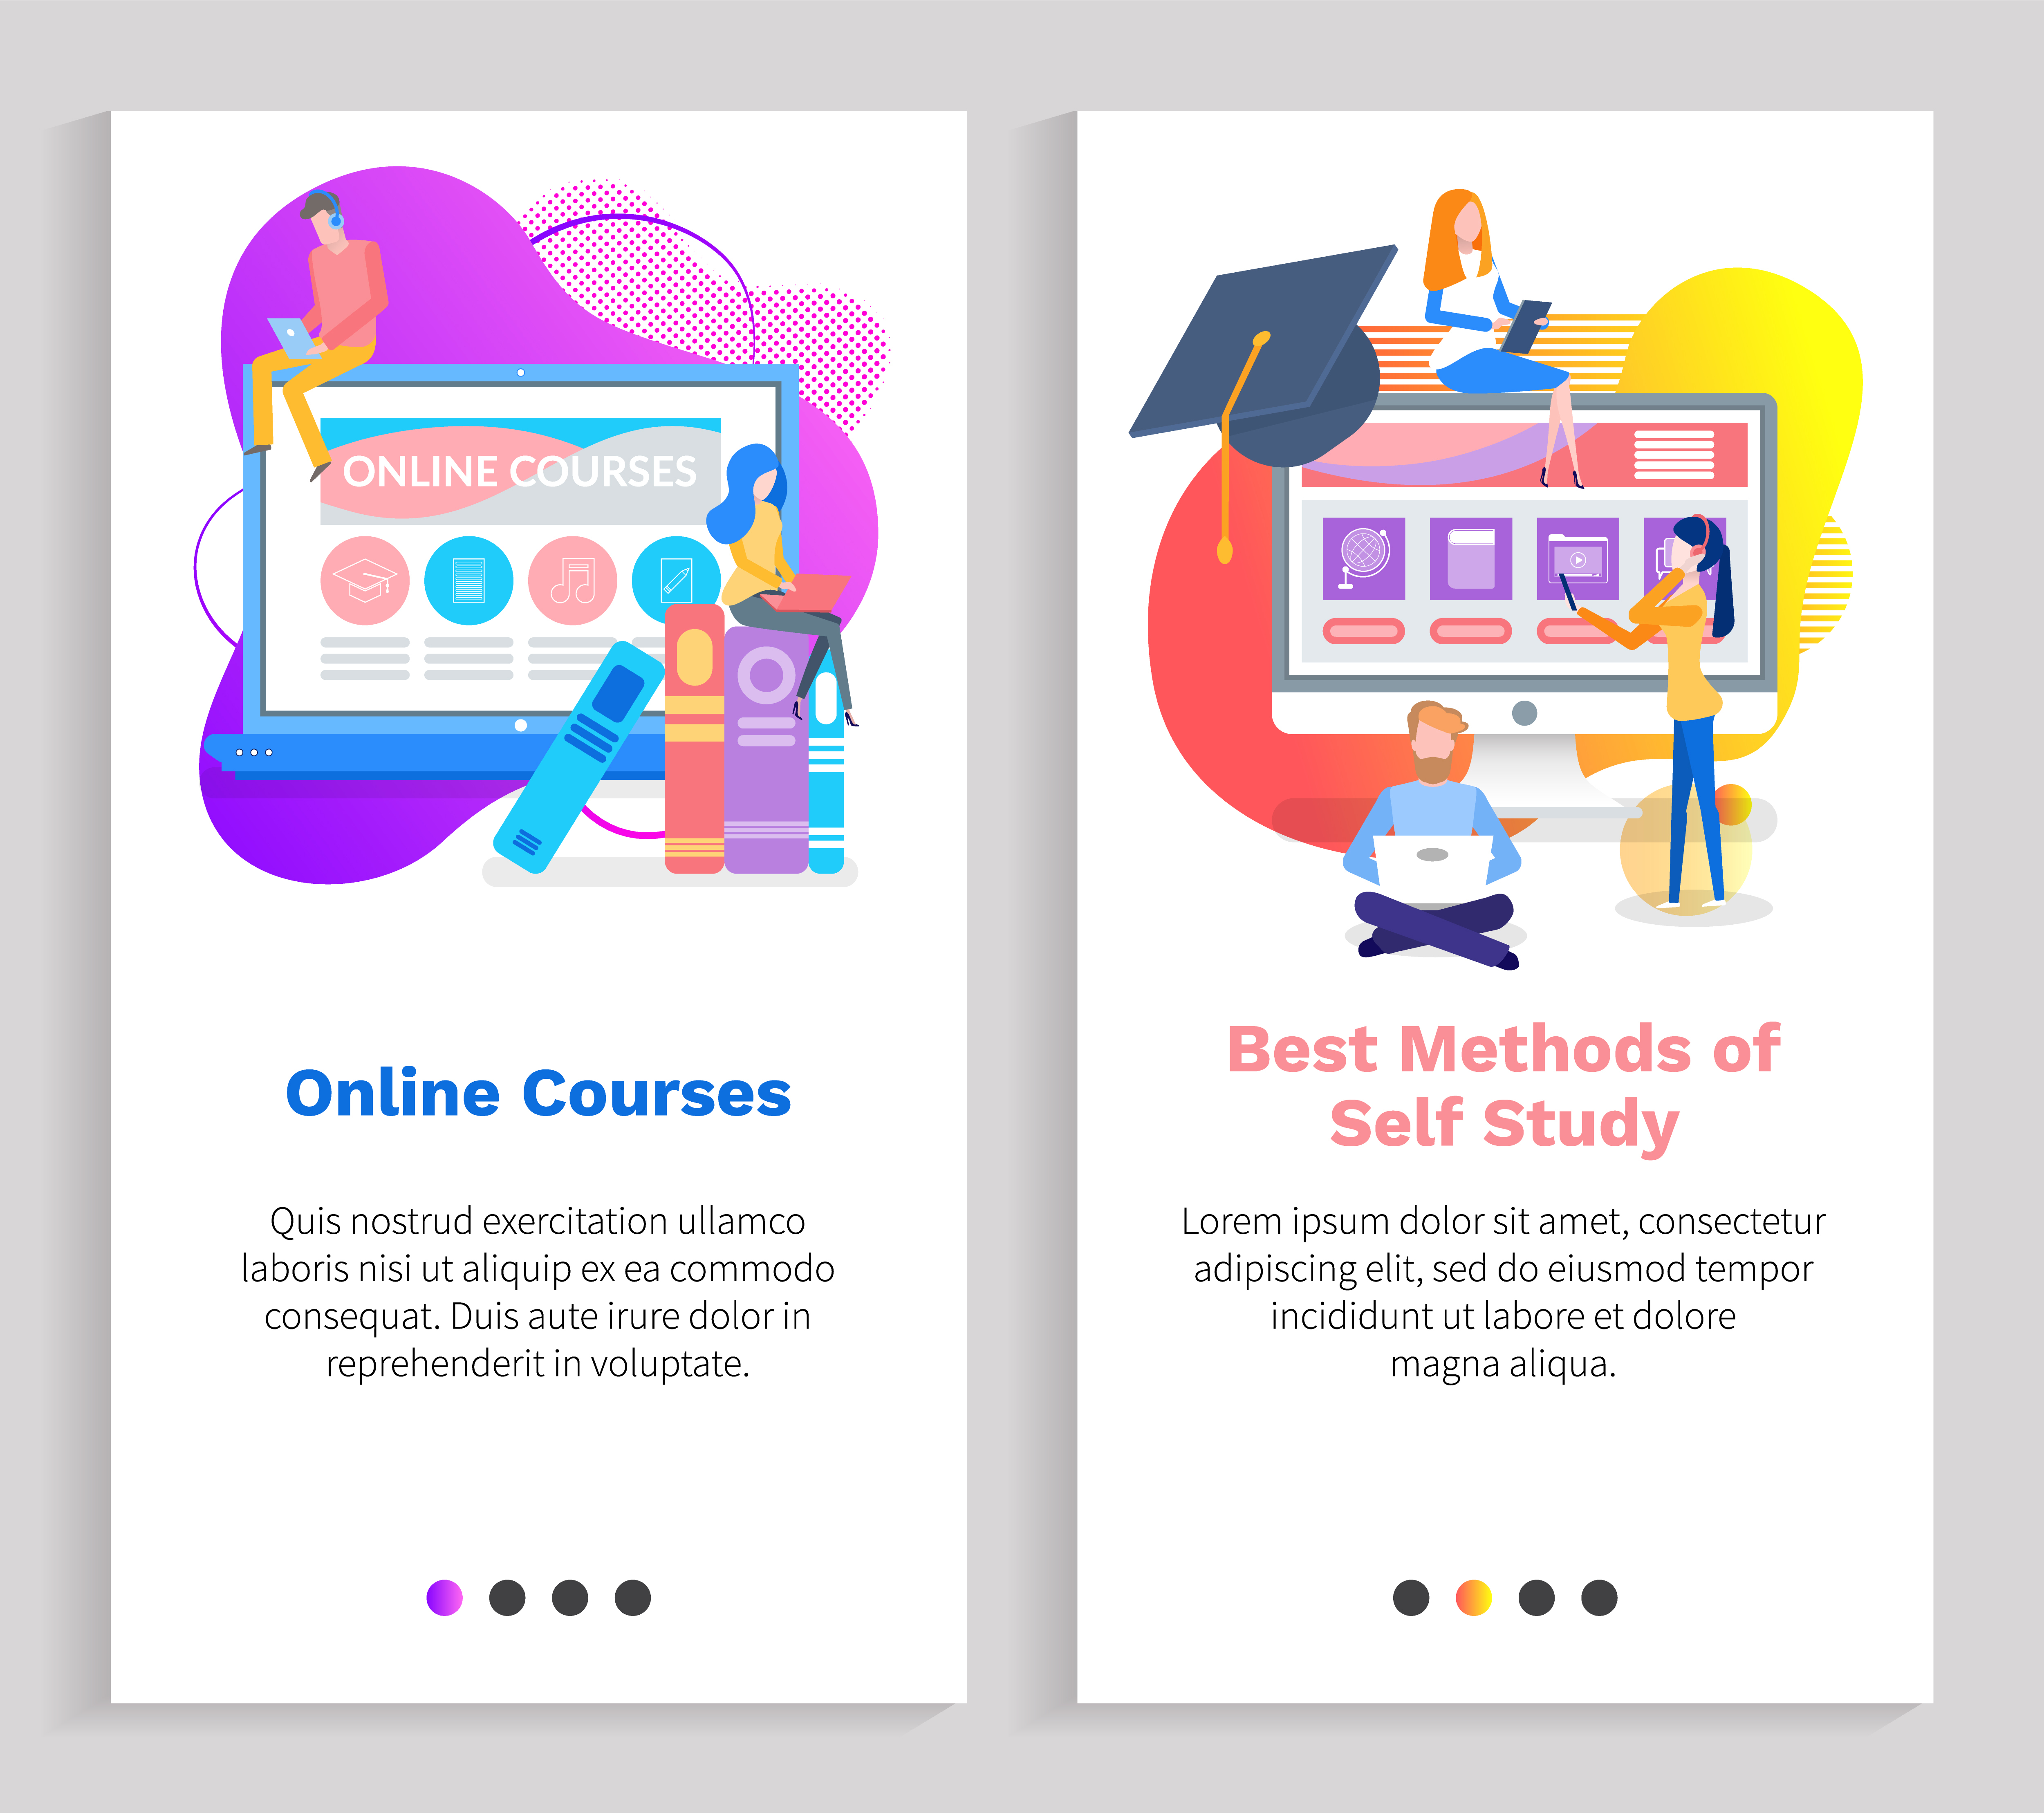 Online courses vector, education and tool for effective knowledge gaining, monitor with digital access for students, people with tasks from school. Website or slider app, landing page flat style. Online Course and Best Method of Studying Vector